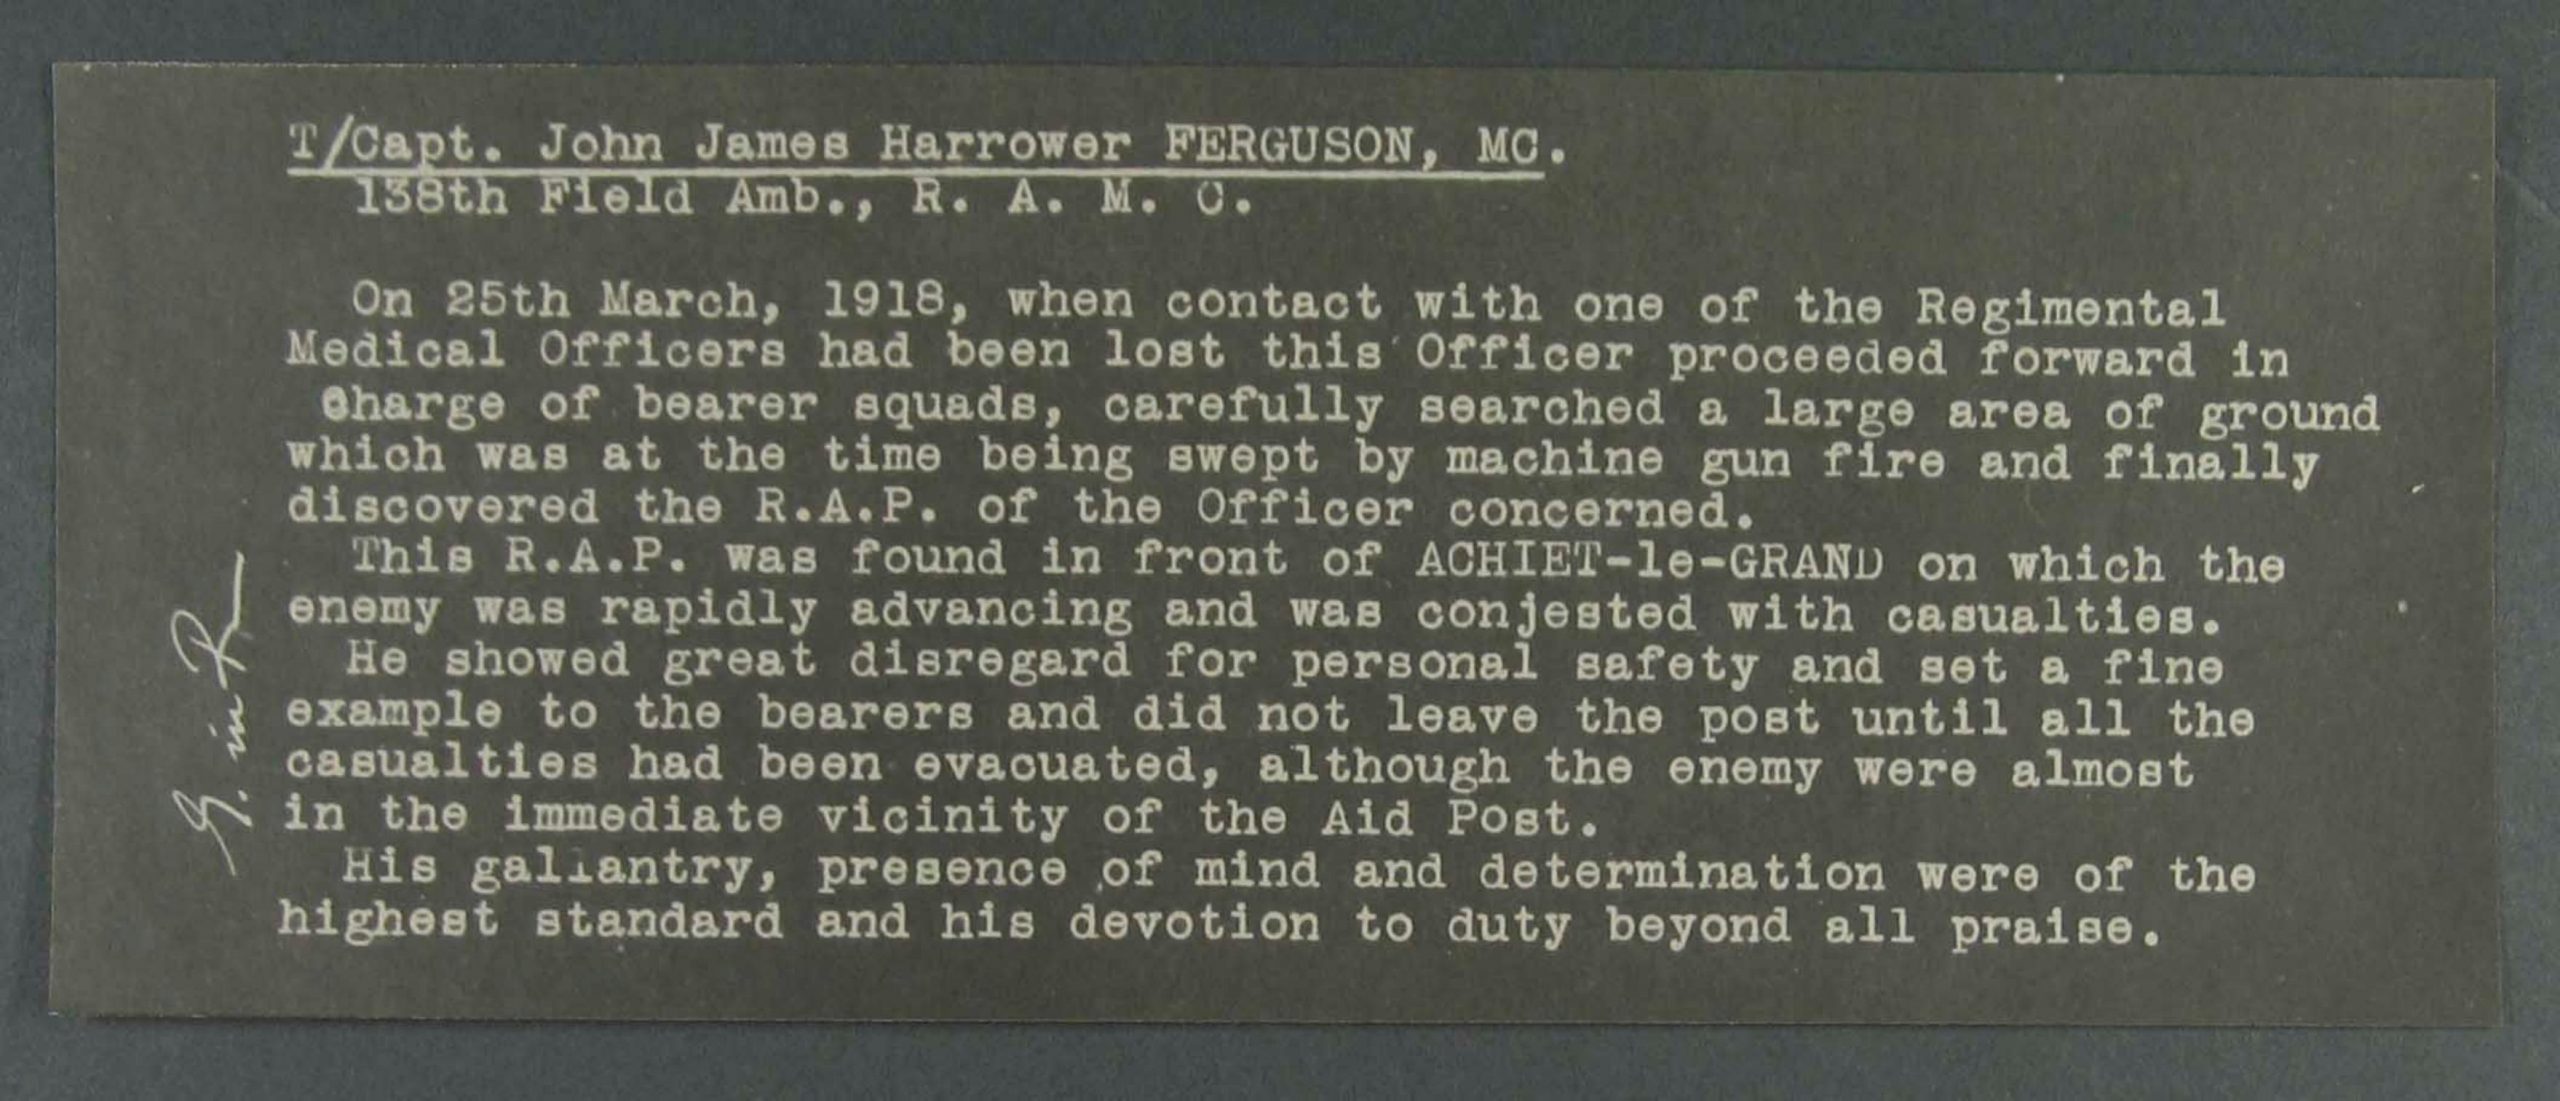 John James Harrower Ferguson - commendation from138th Field Ambulance Royal Army Medical Corps for whom Zem Zem was a Temporary Captain